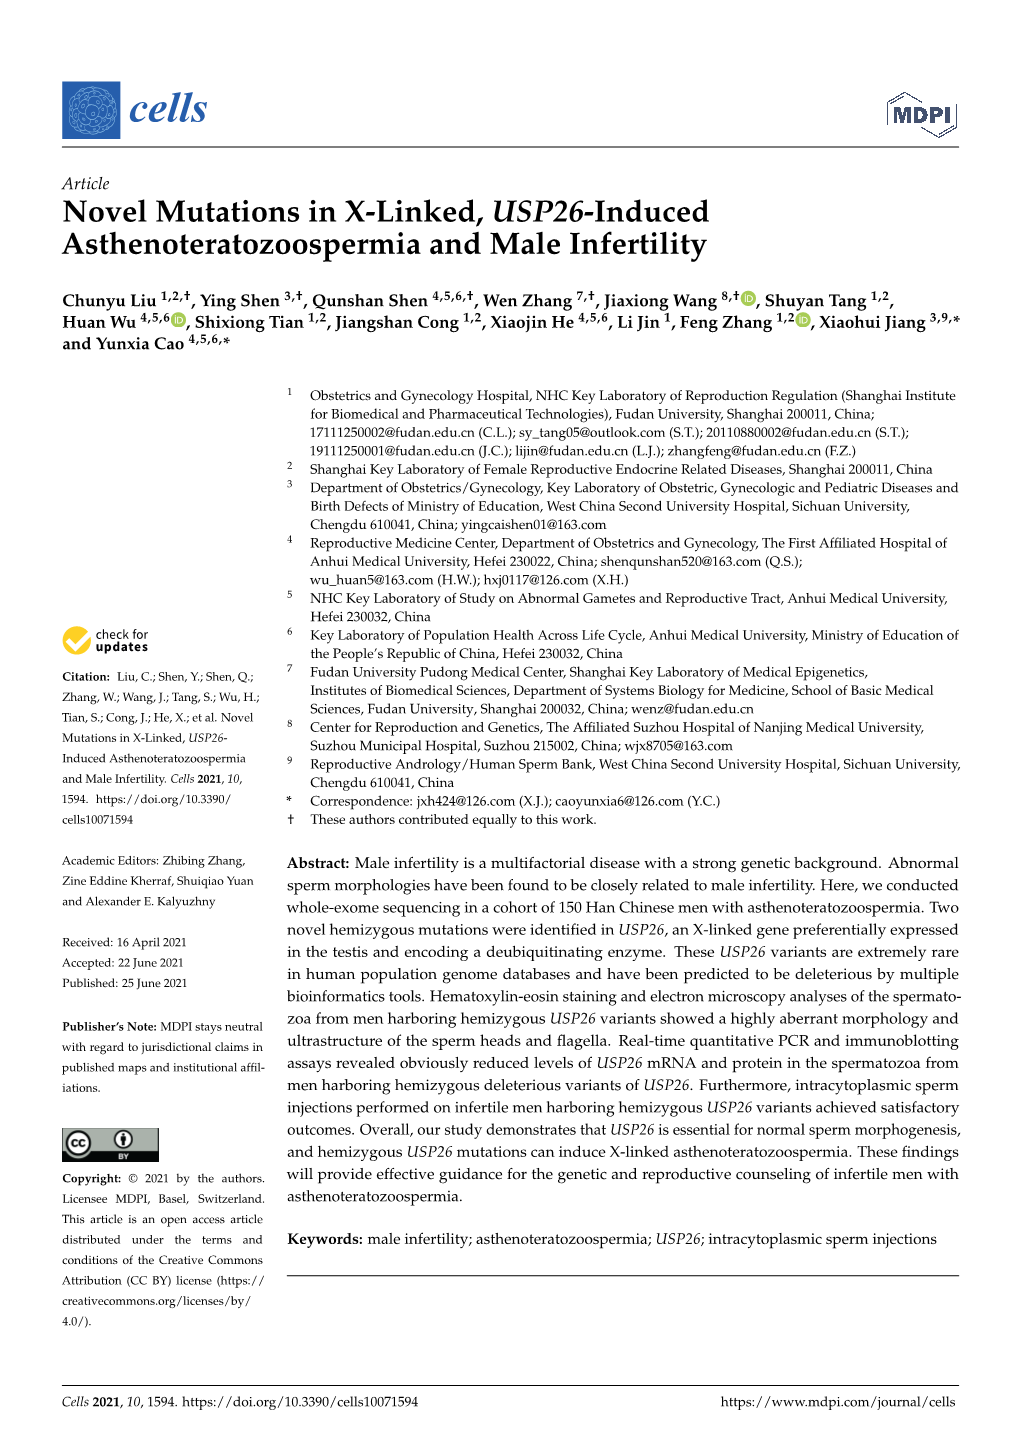 Novel Mutations in X-Linked, USP26-Induced Asthenoteratozoospermia and Male Infertility